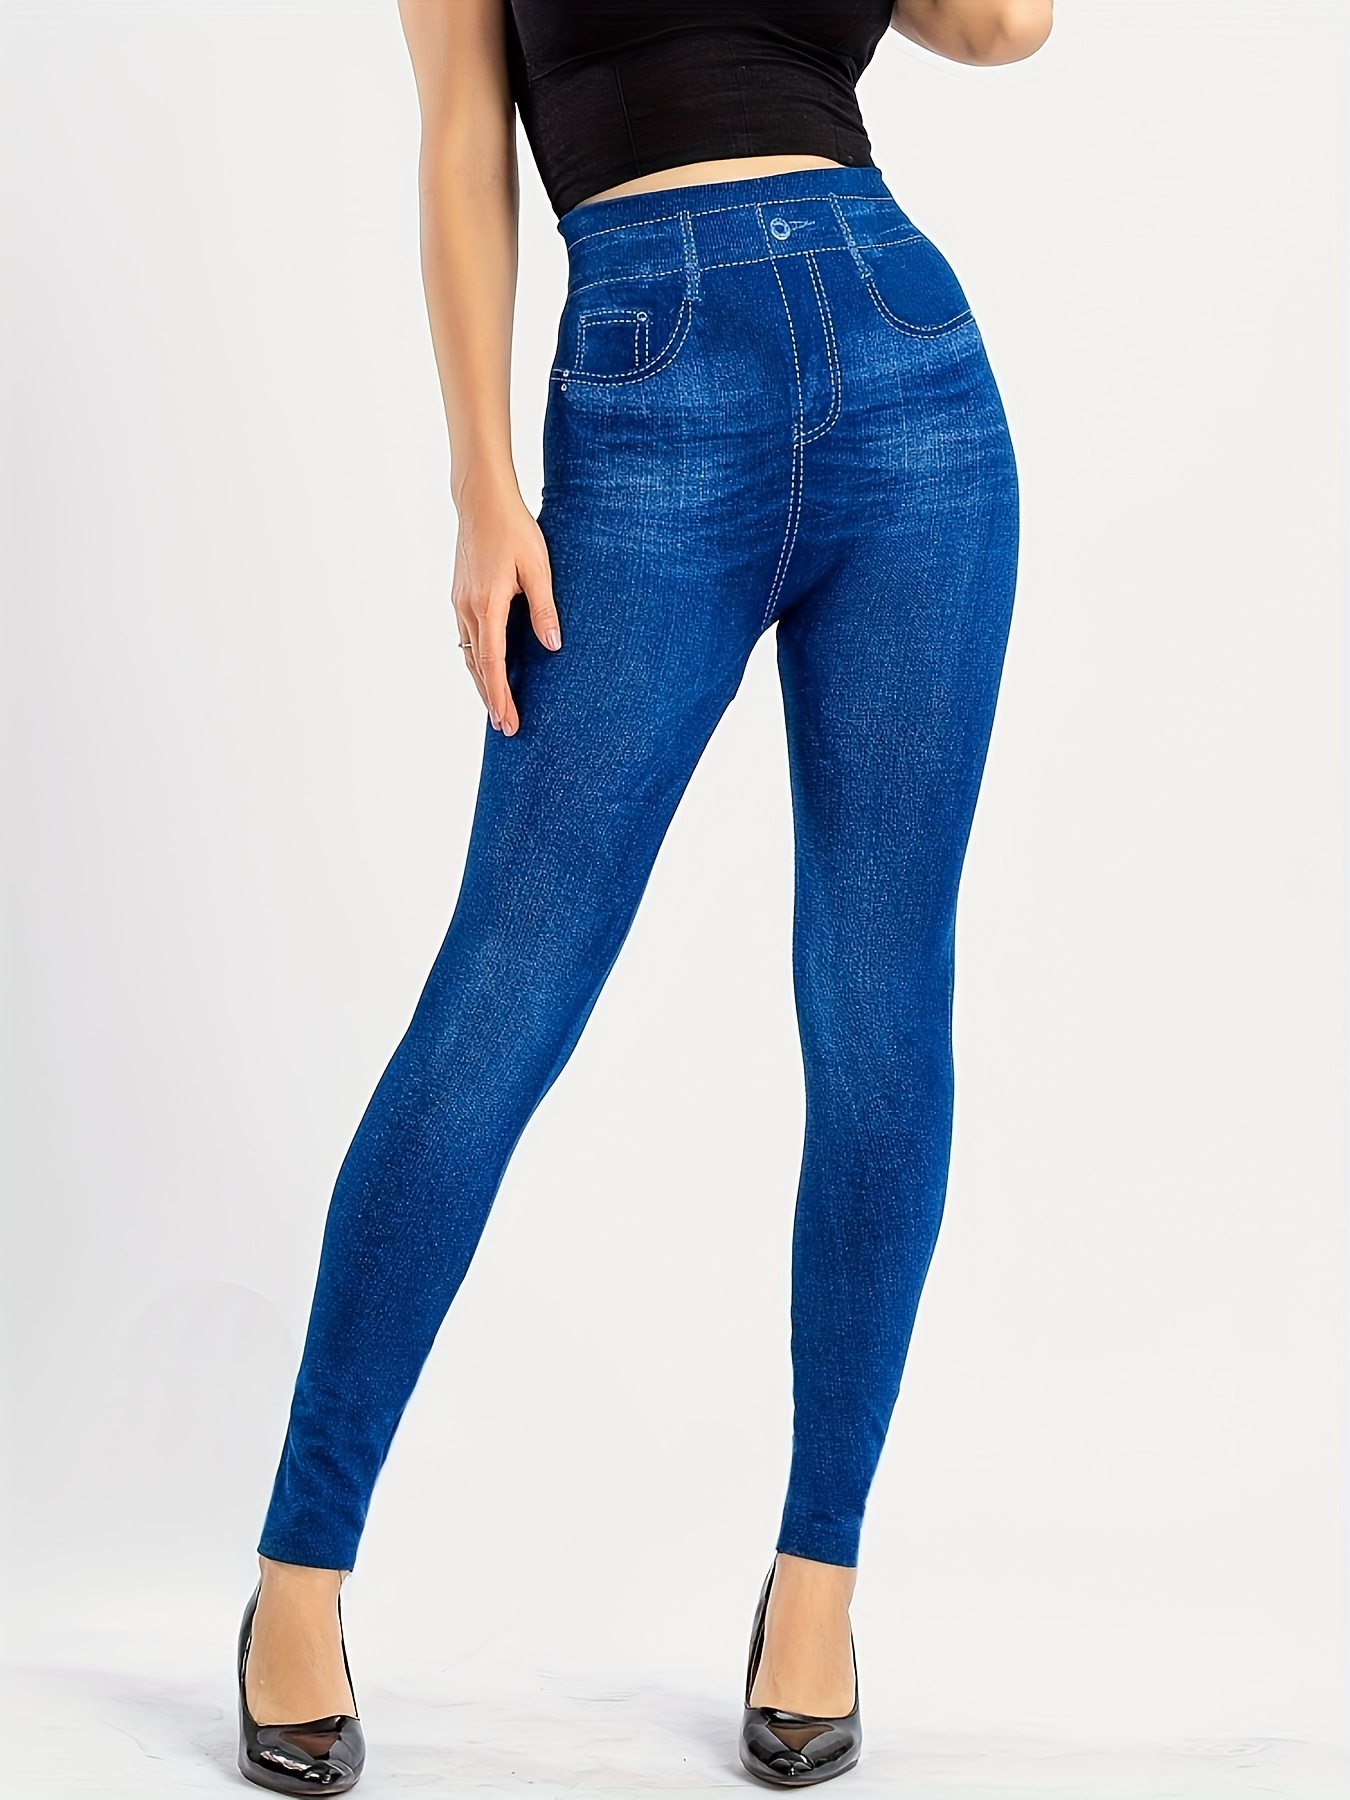 Women Stretchable High Waist Jegging